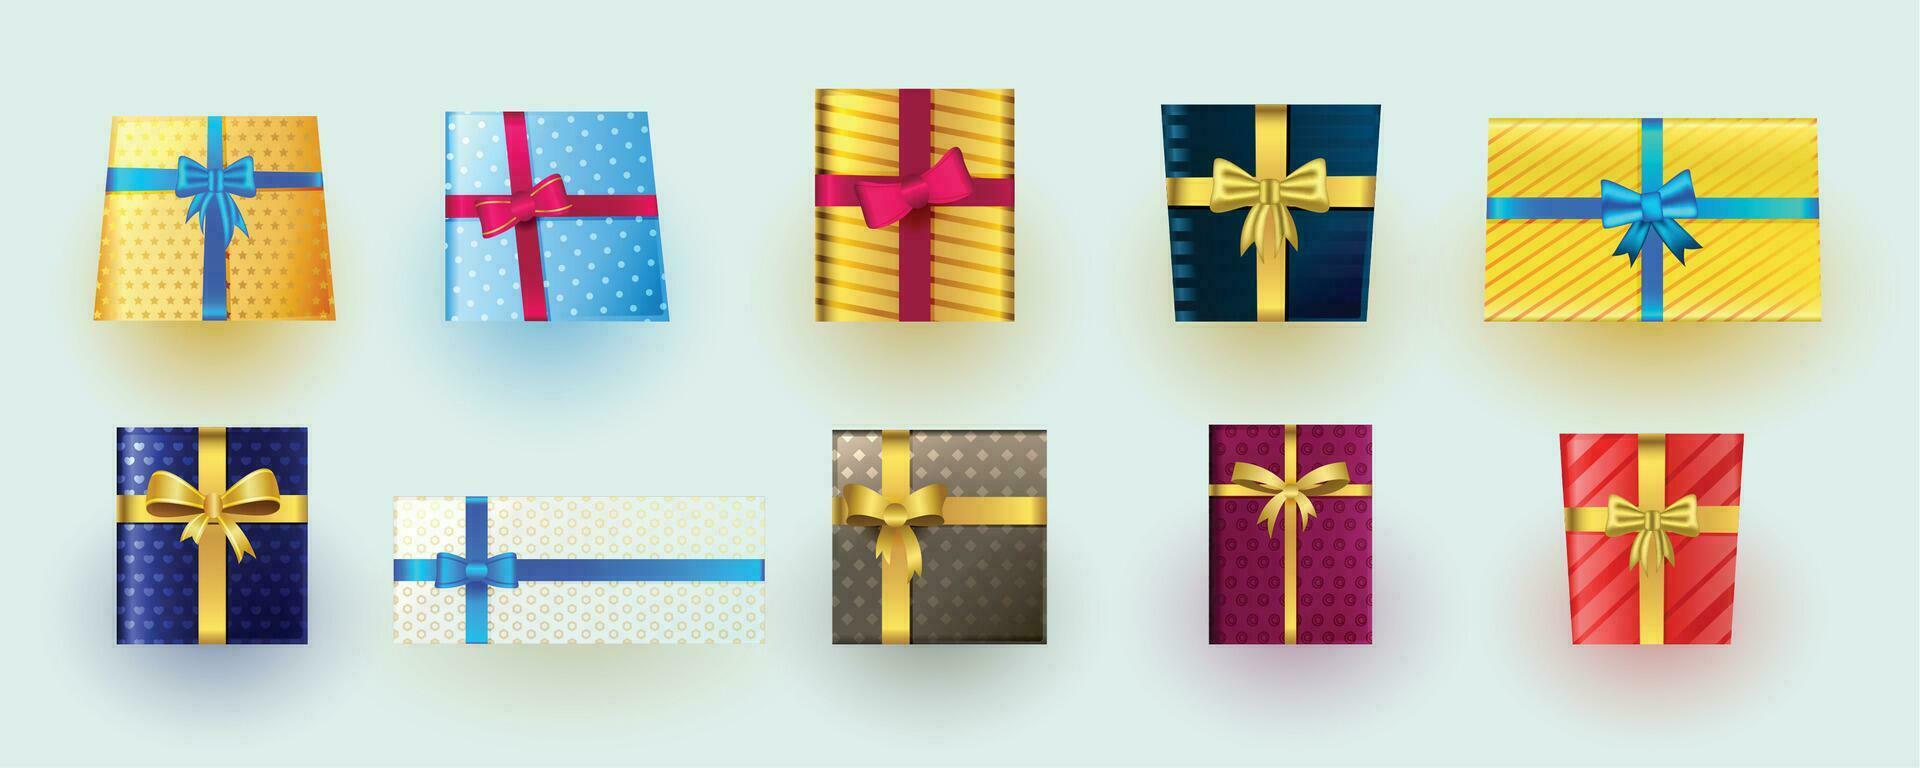 collection of colorful gift box ornaments for xmas design vector